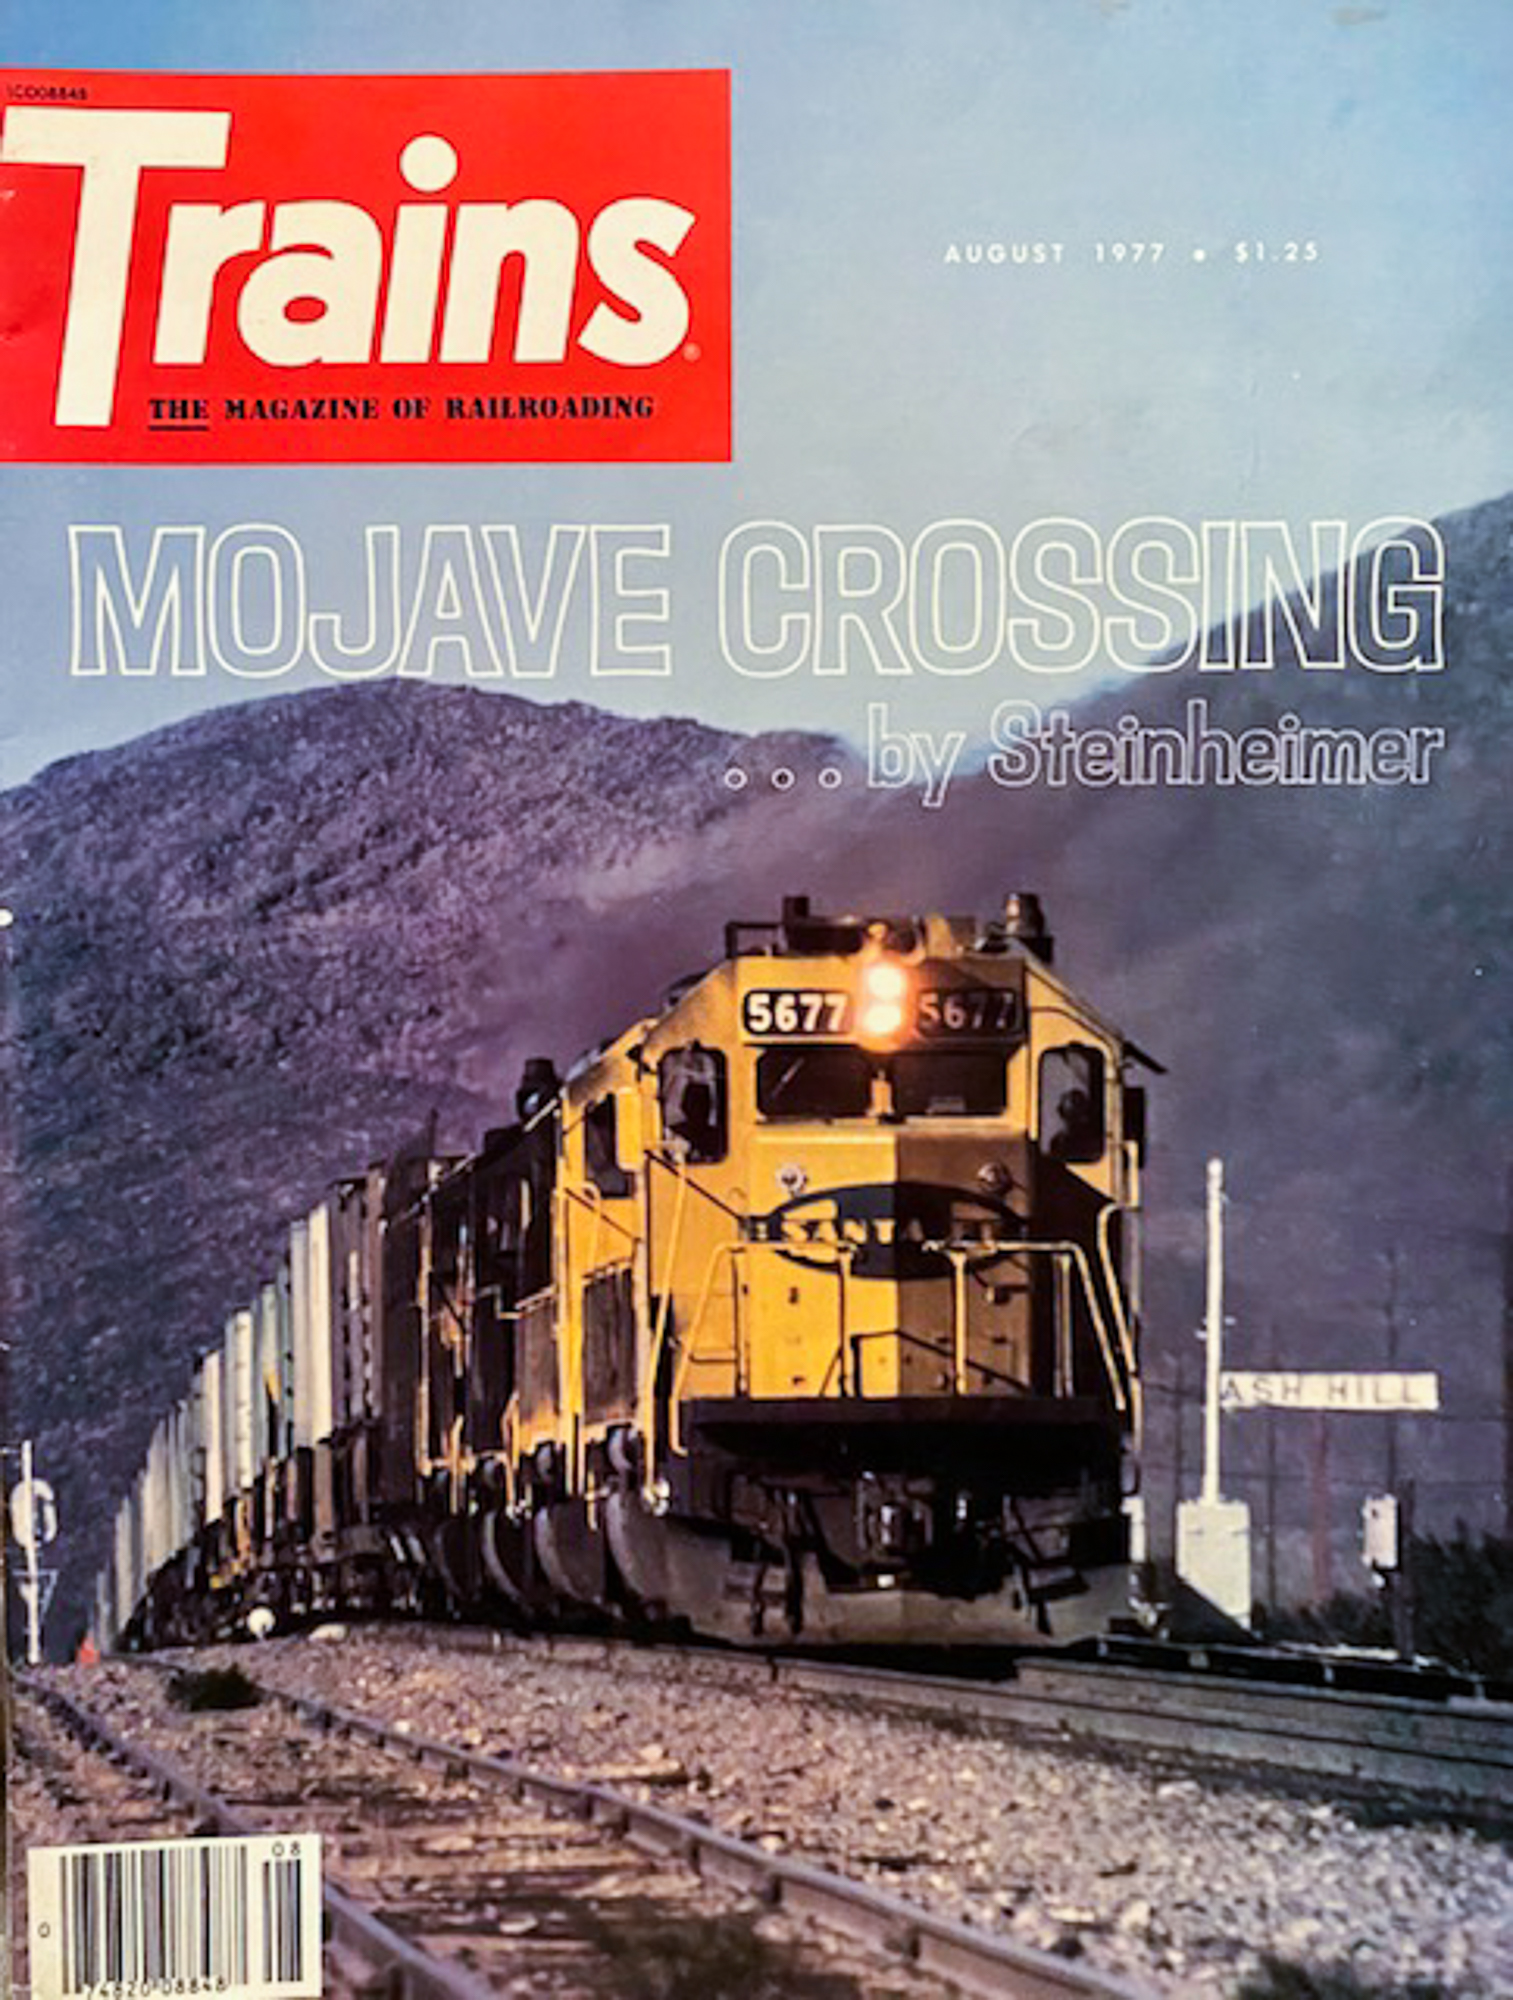 Cover of August 1977 Trains Magazine with Santa Fe piggyback train